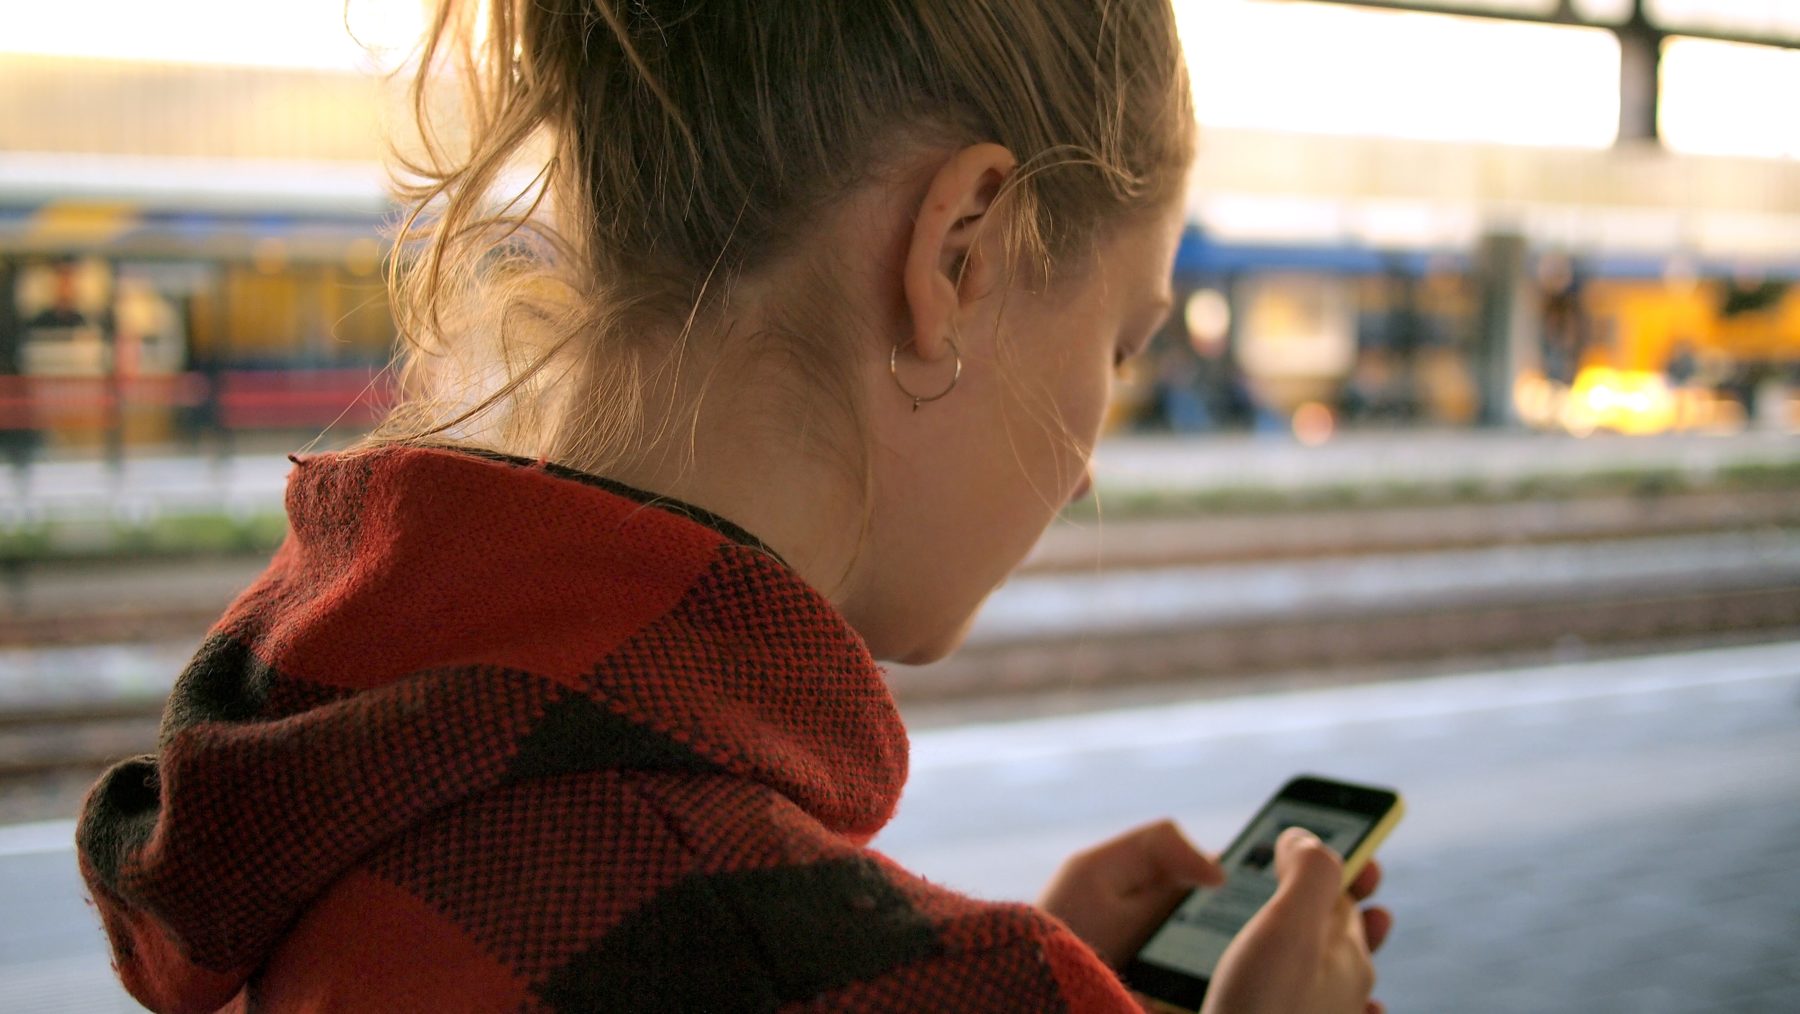 A young women using her smartphone at a train station.